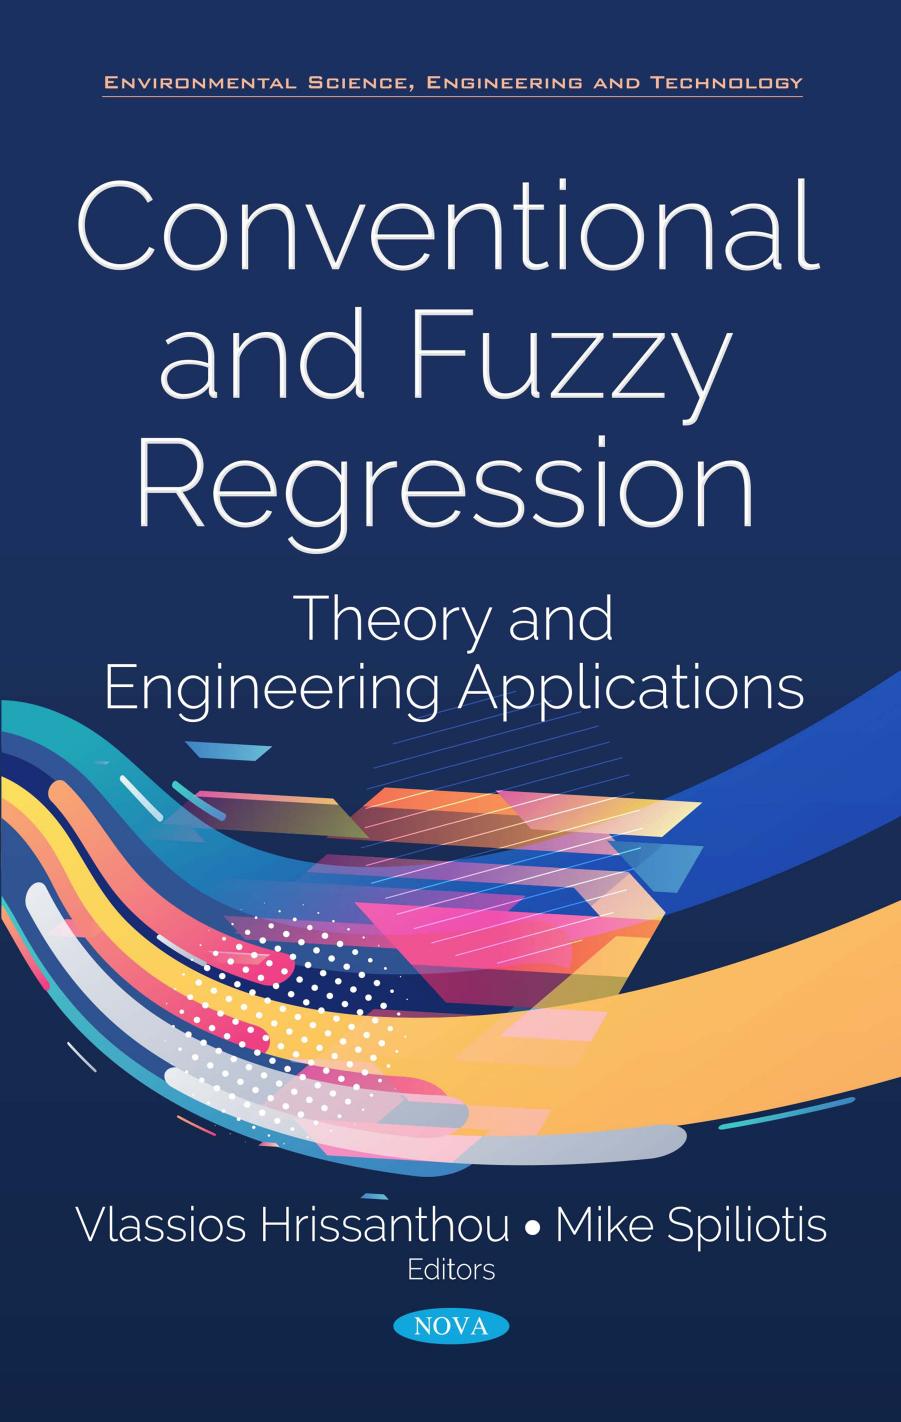 Conventional and Fuzzy Regression: Theory and Engineering Applications